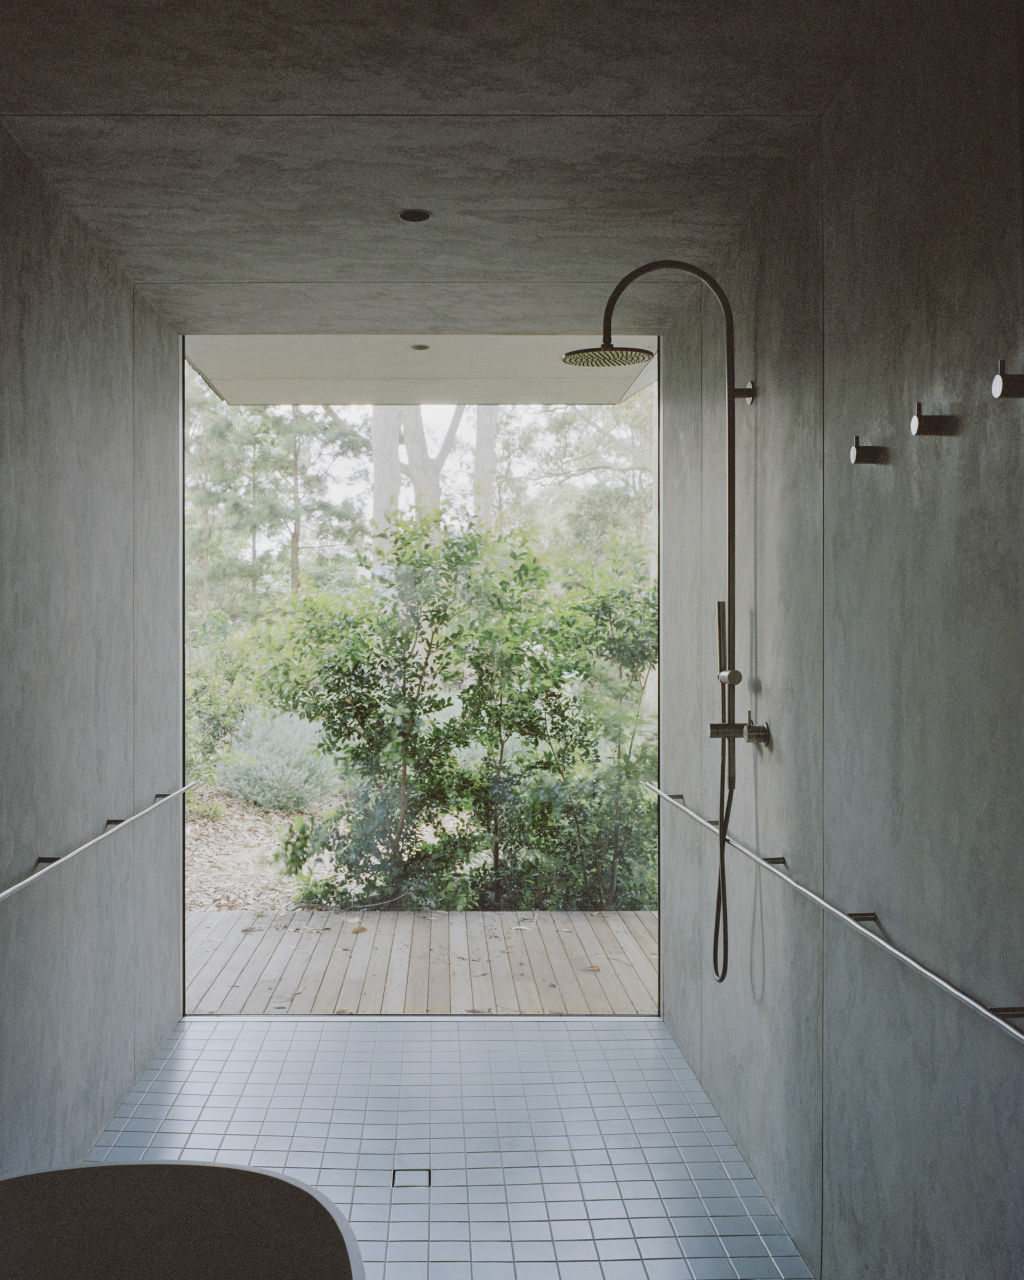 The home was designed to connect with the surrounding landscape. Photo: Rory Gardiner